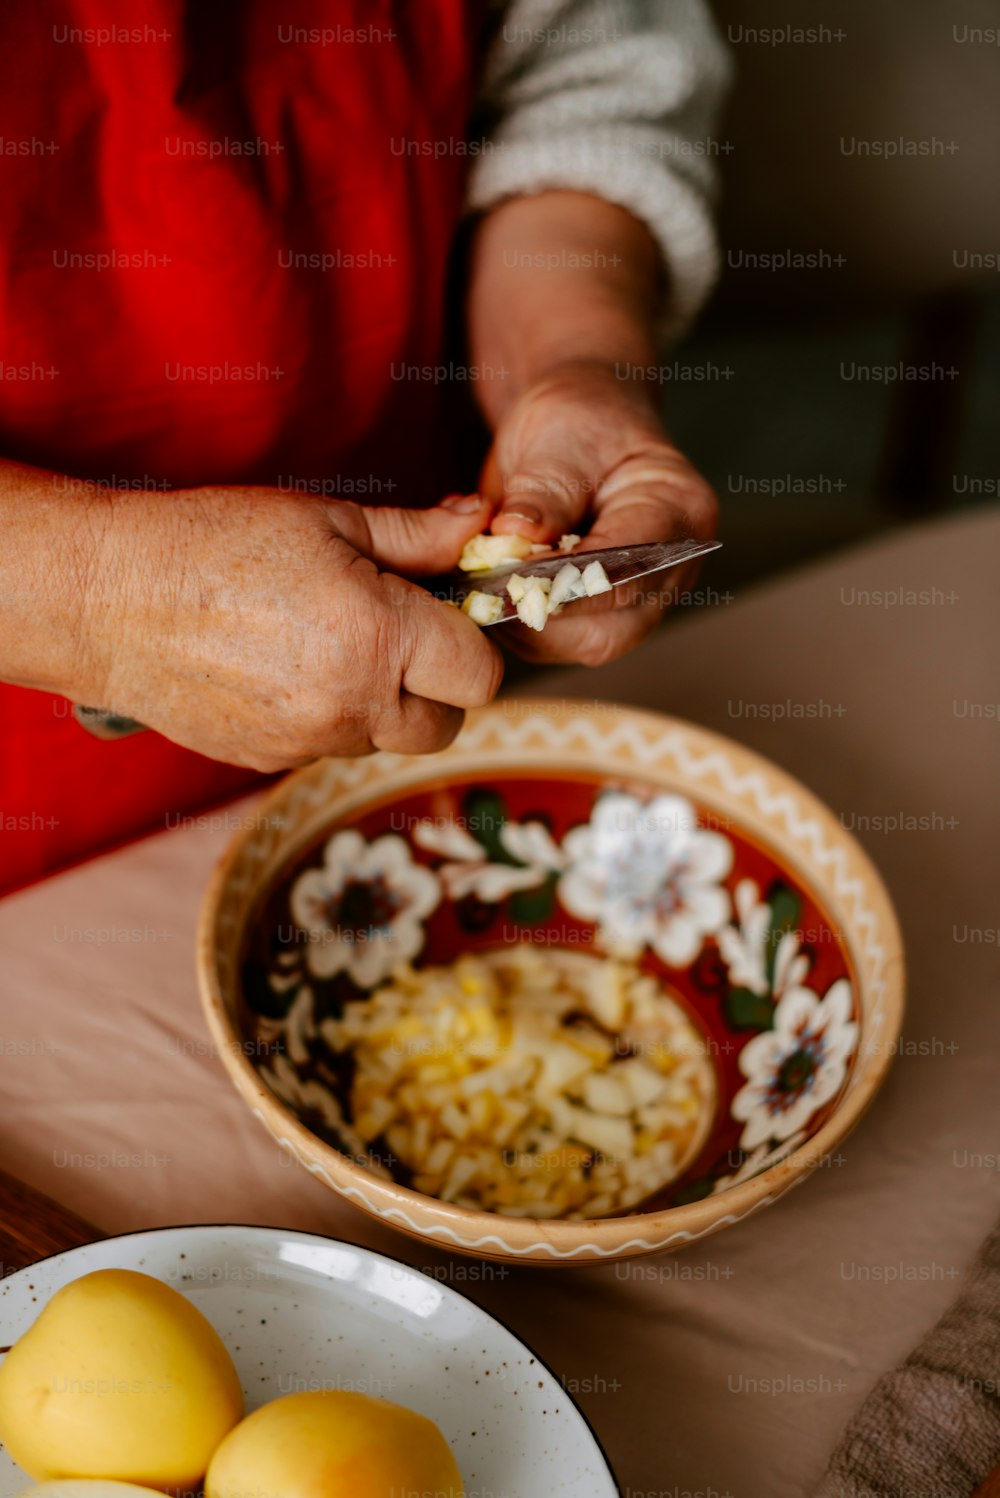 a woman in a red apron is holding a knife and a bowl of food